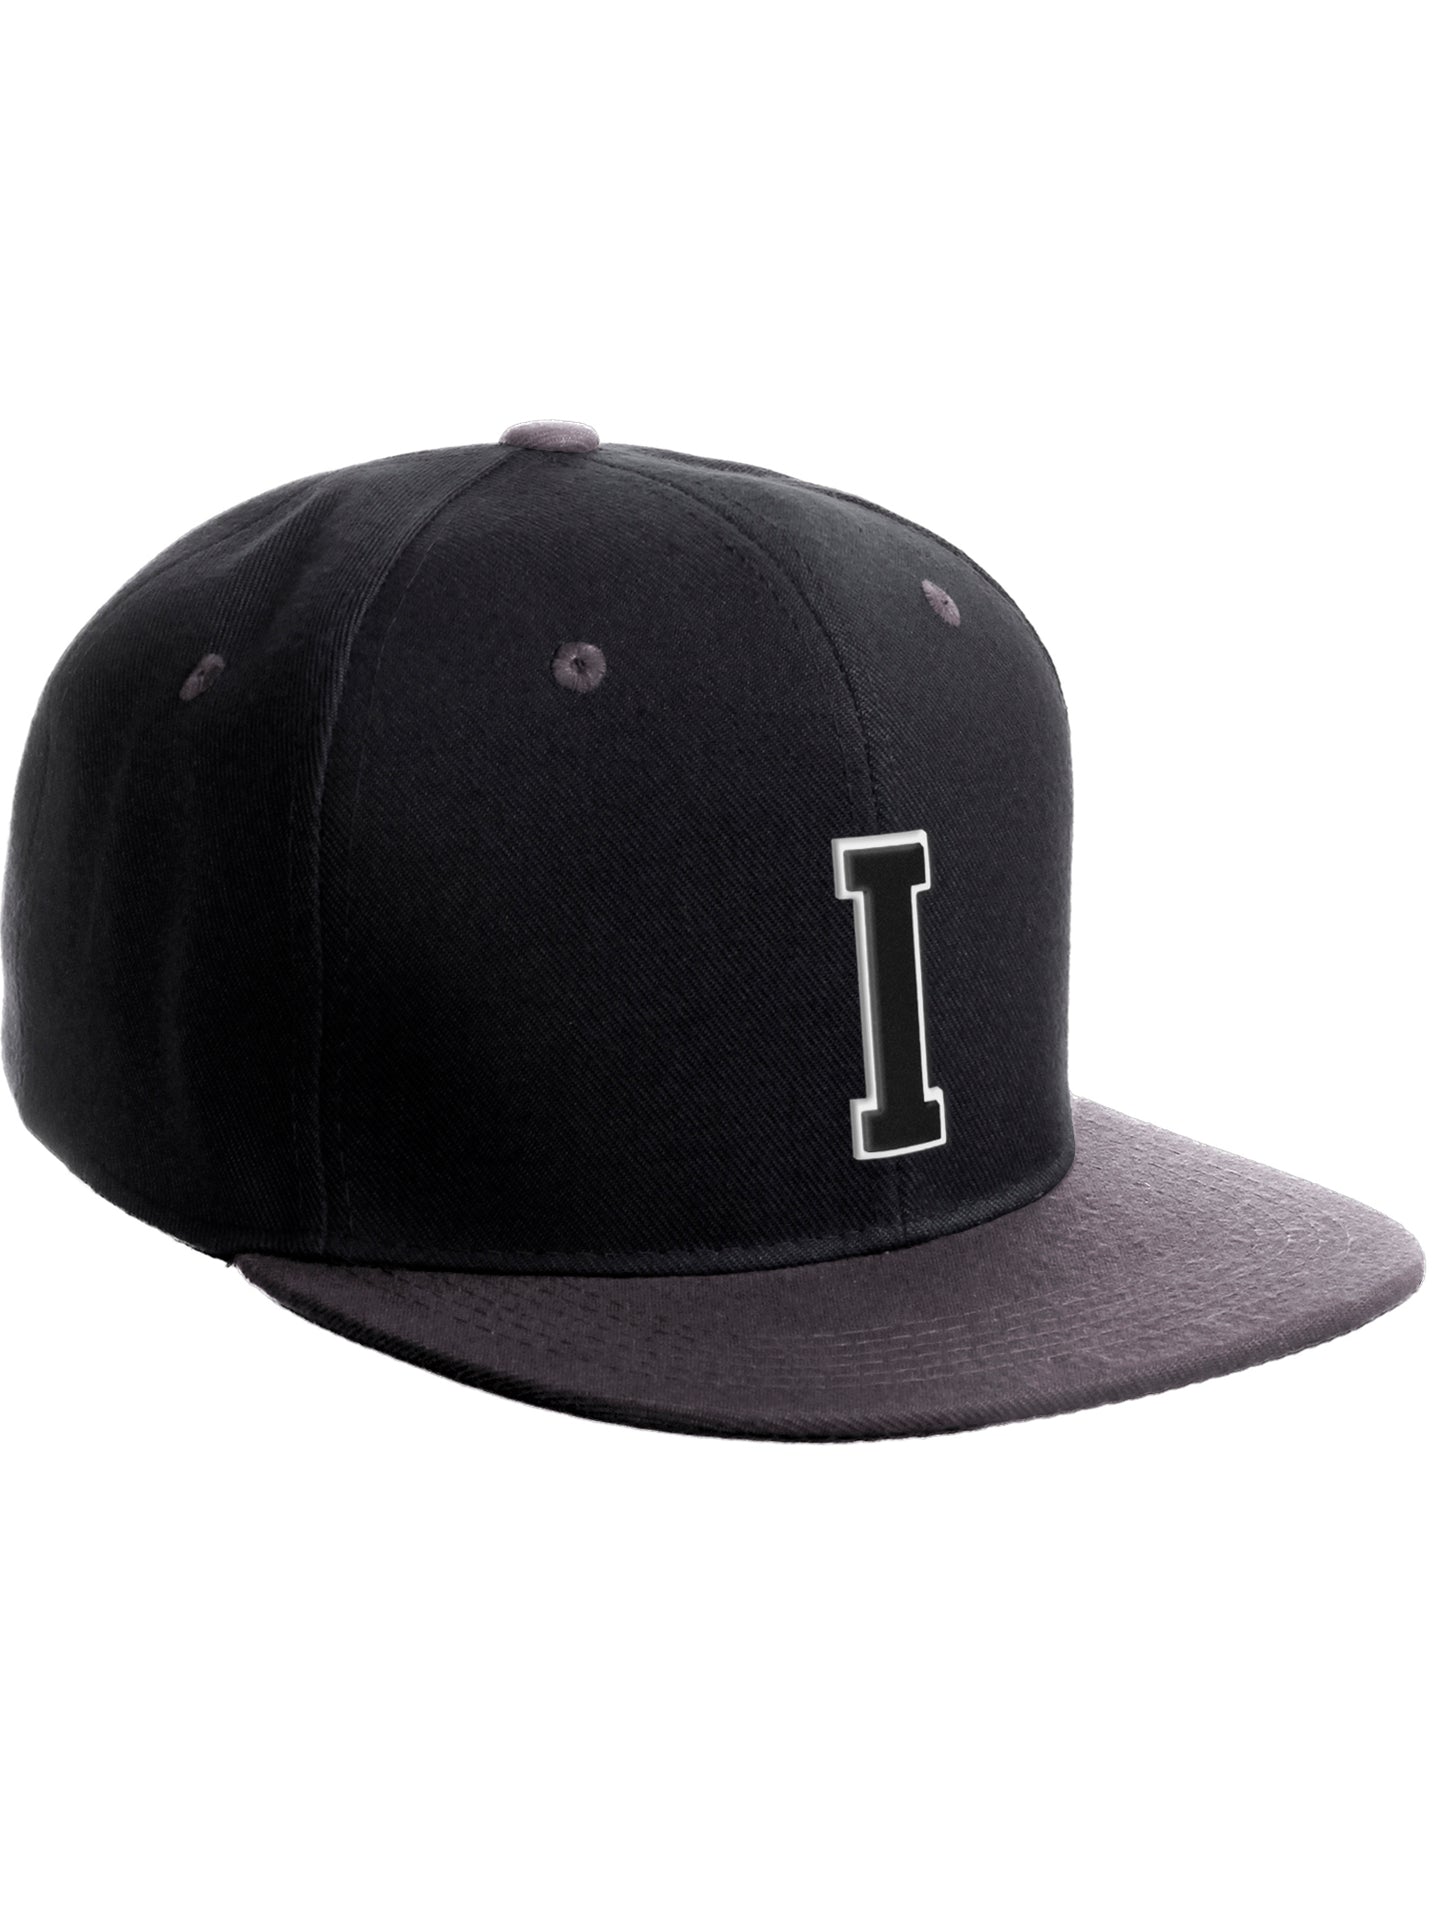 Classic Snapback Hat Custom A to Z Initial Letters, Black Charcoal Cap Wht Blk